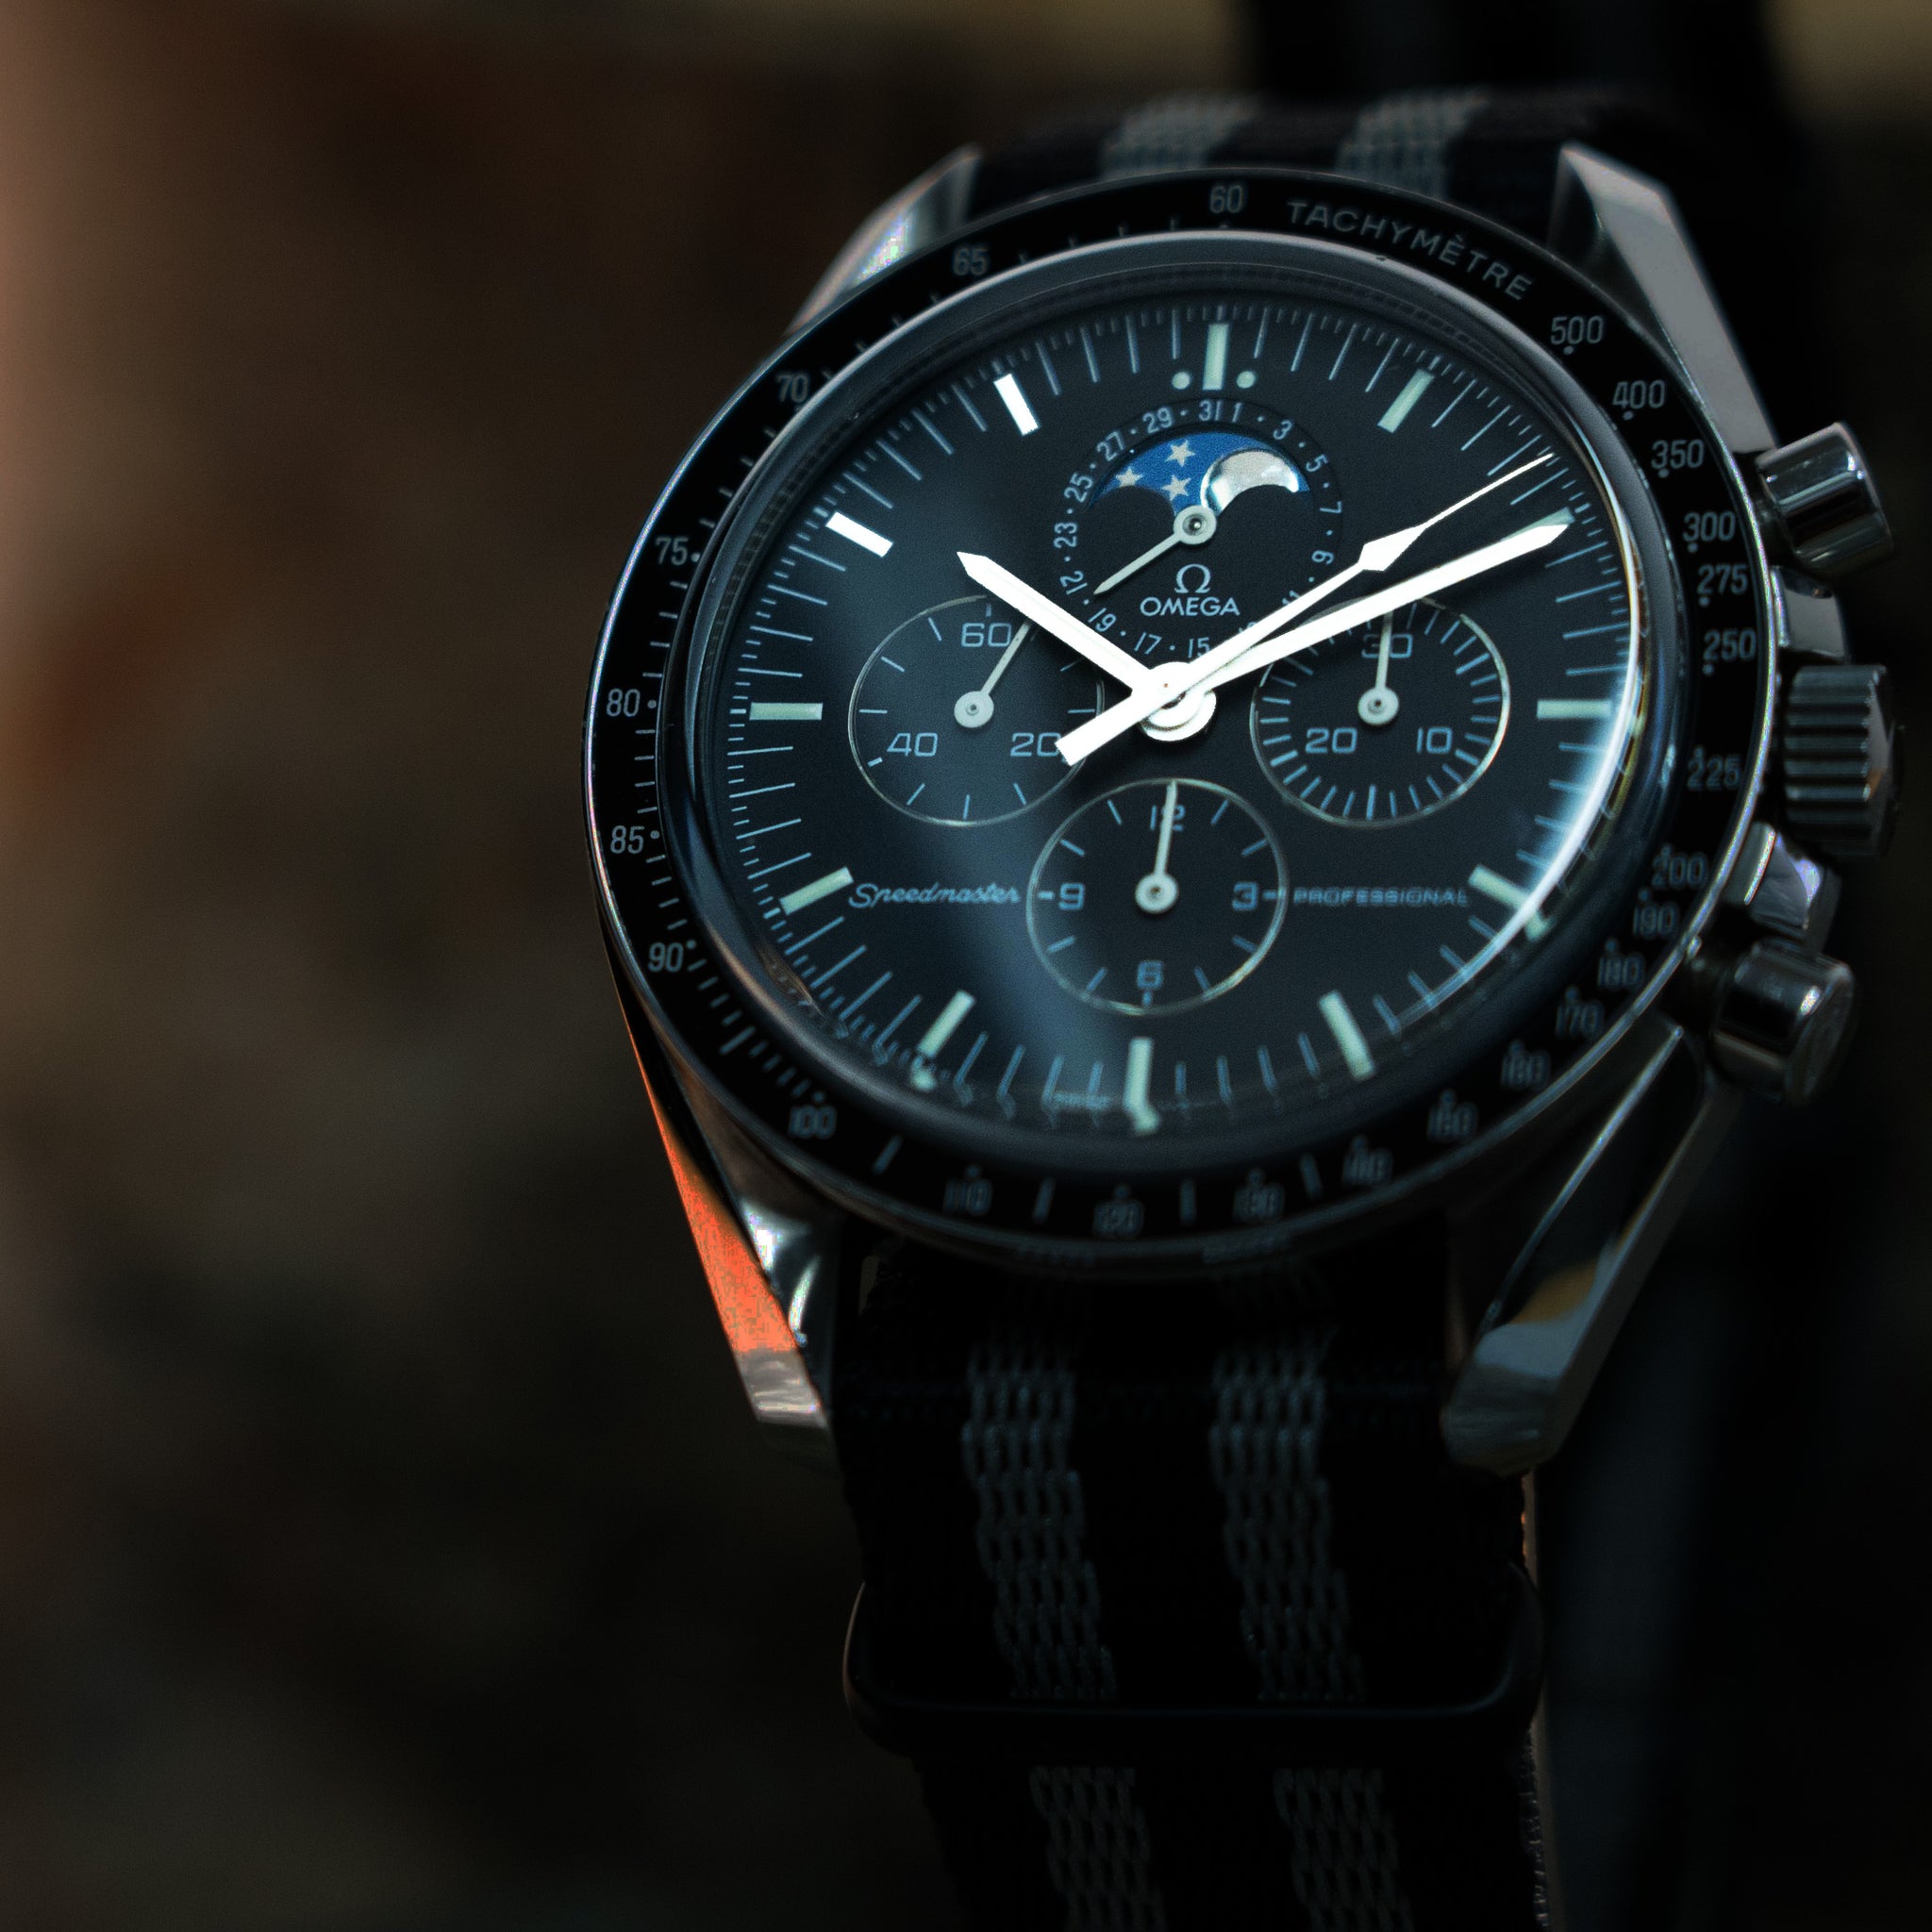 Ten new watches that shoot for the moon